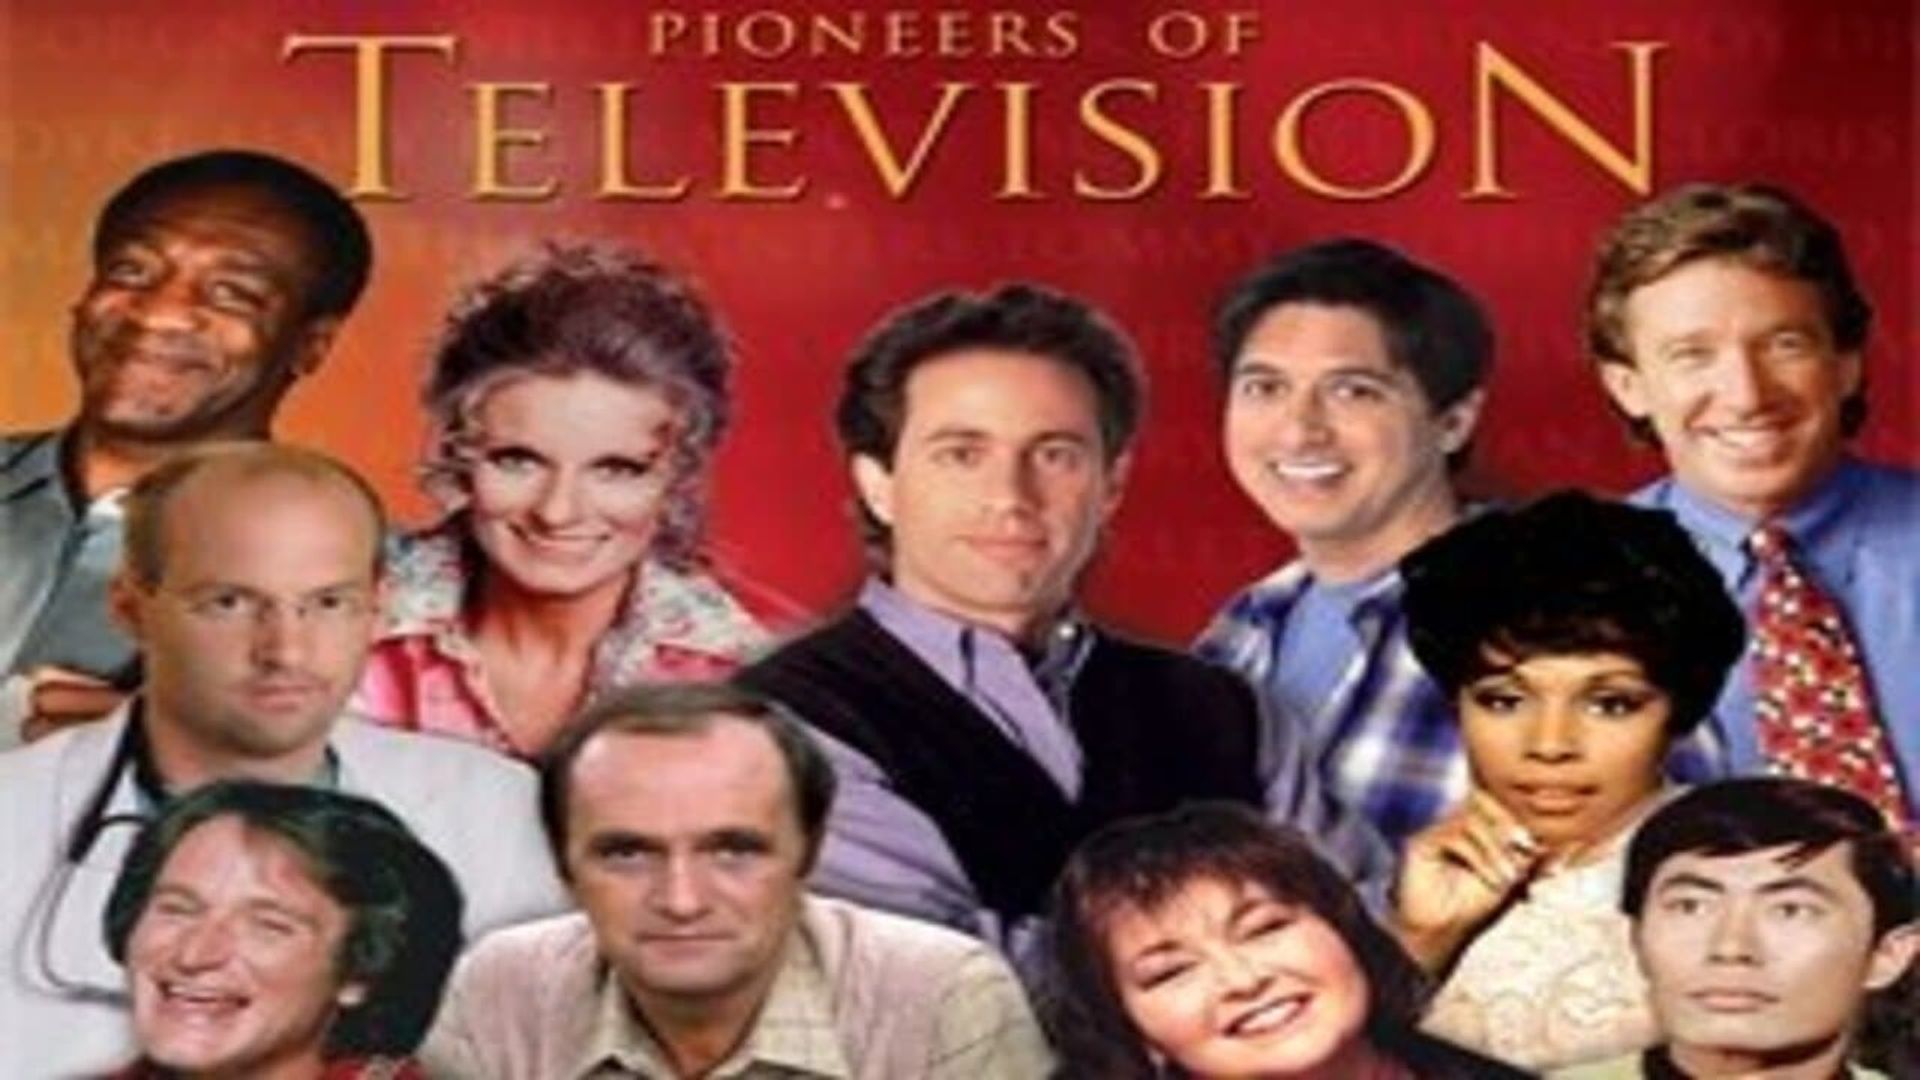 Pioneers of Television background